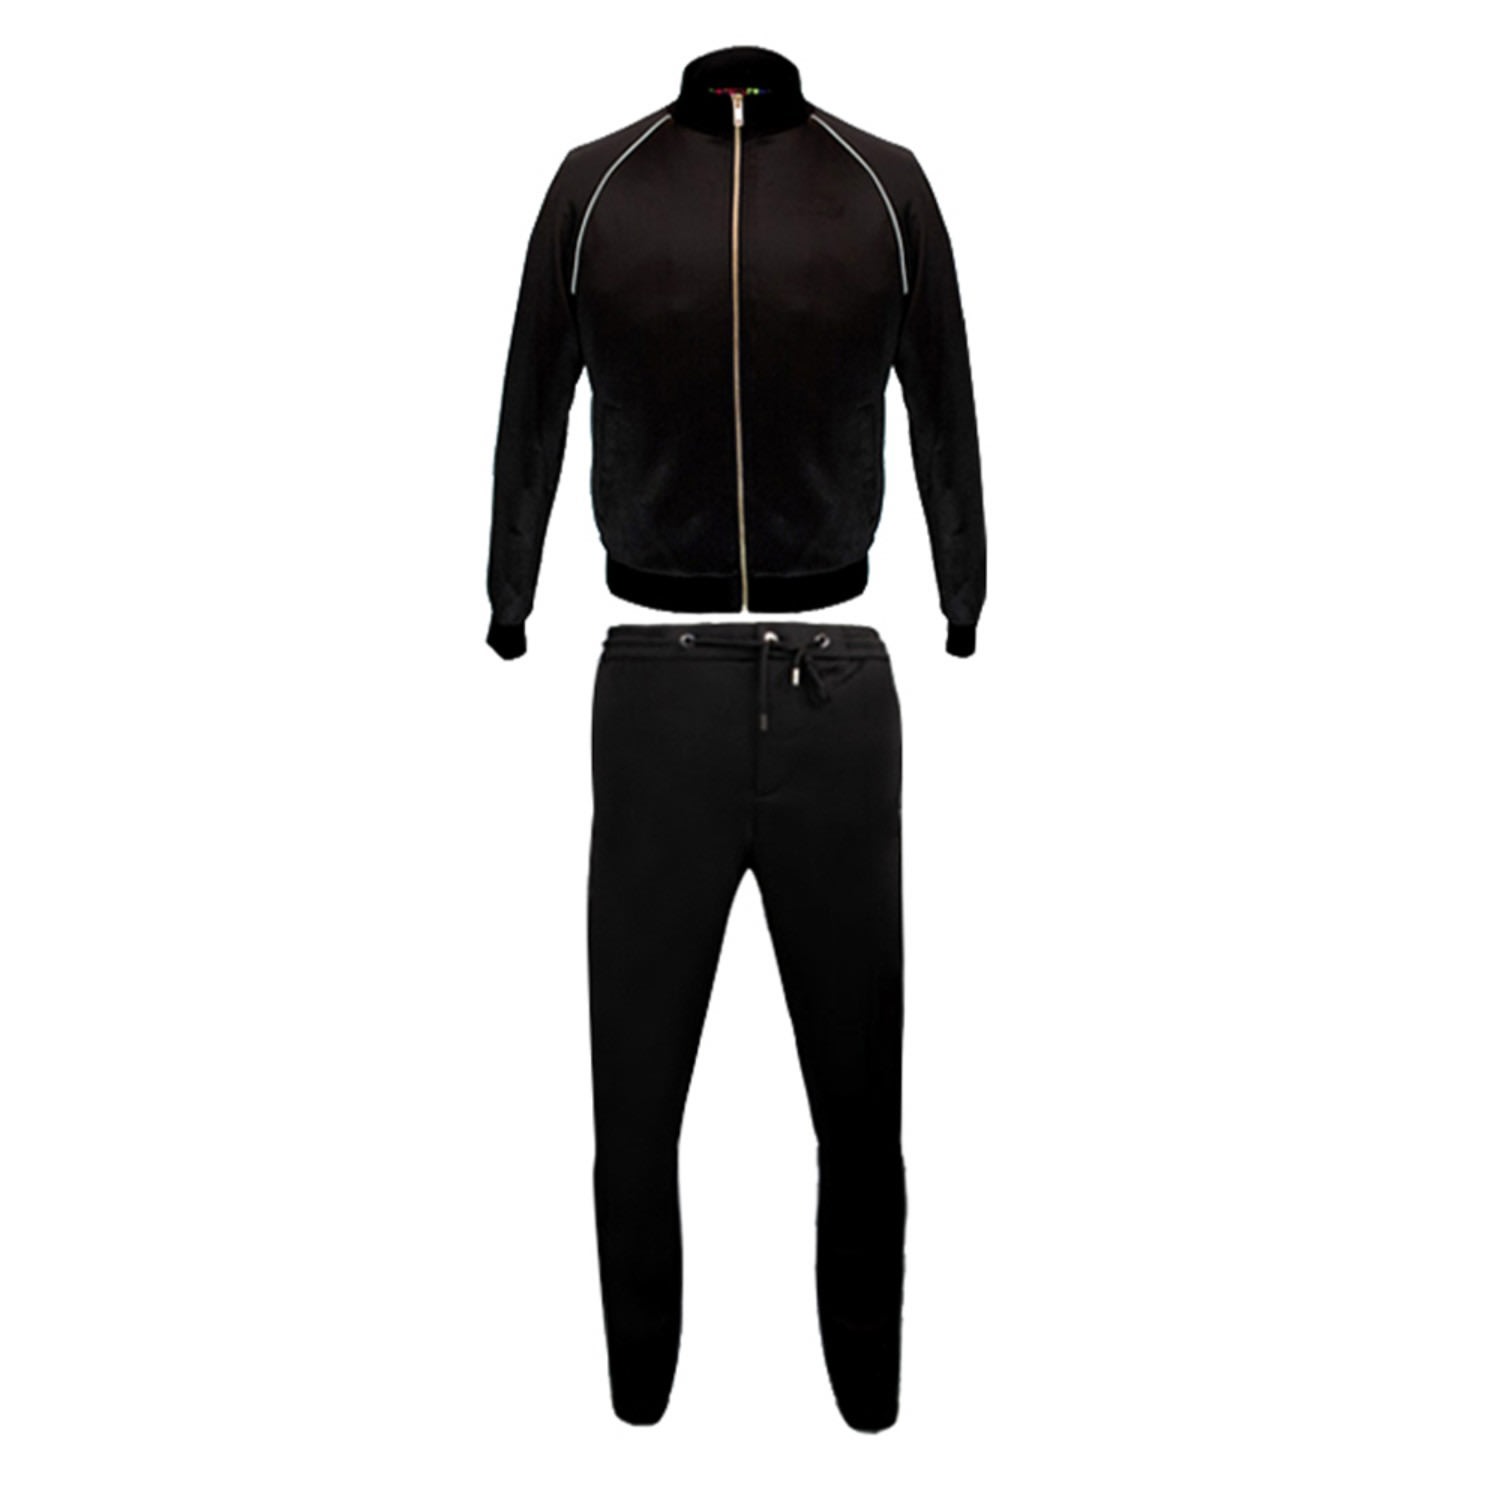 Men’s Greenwich Track Suit - Black Small David Wej